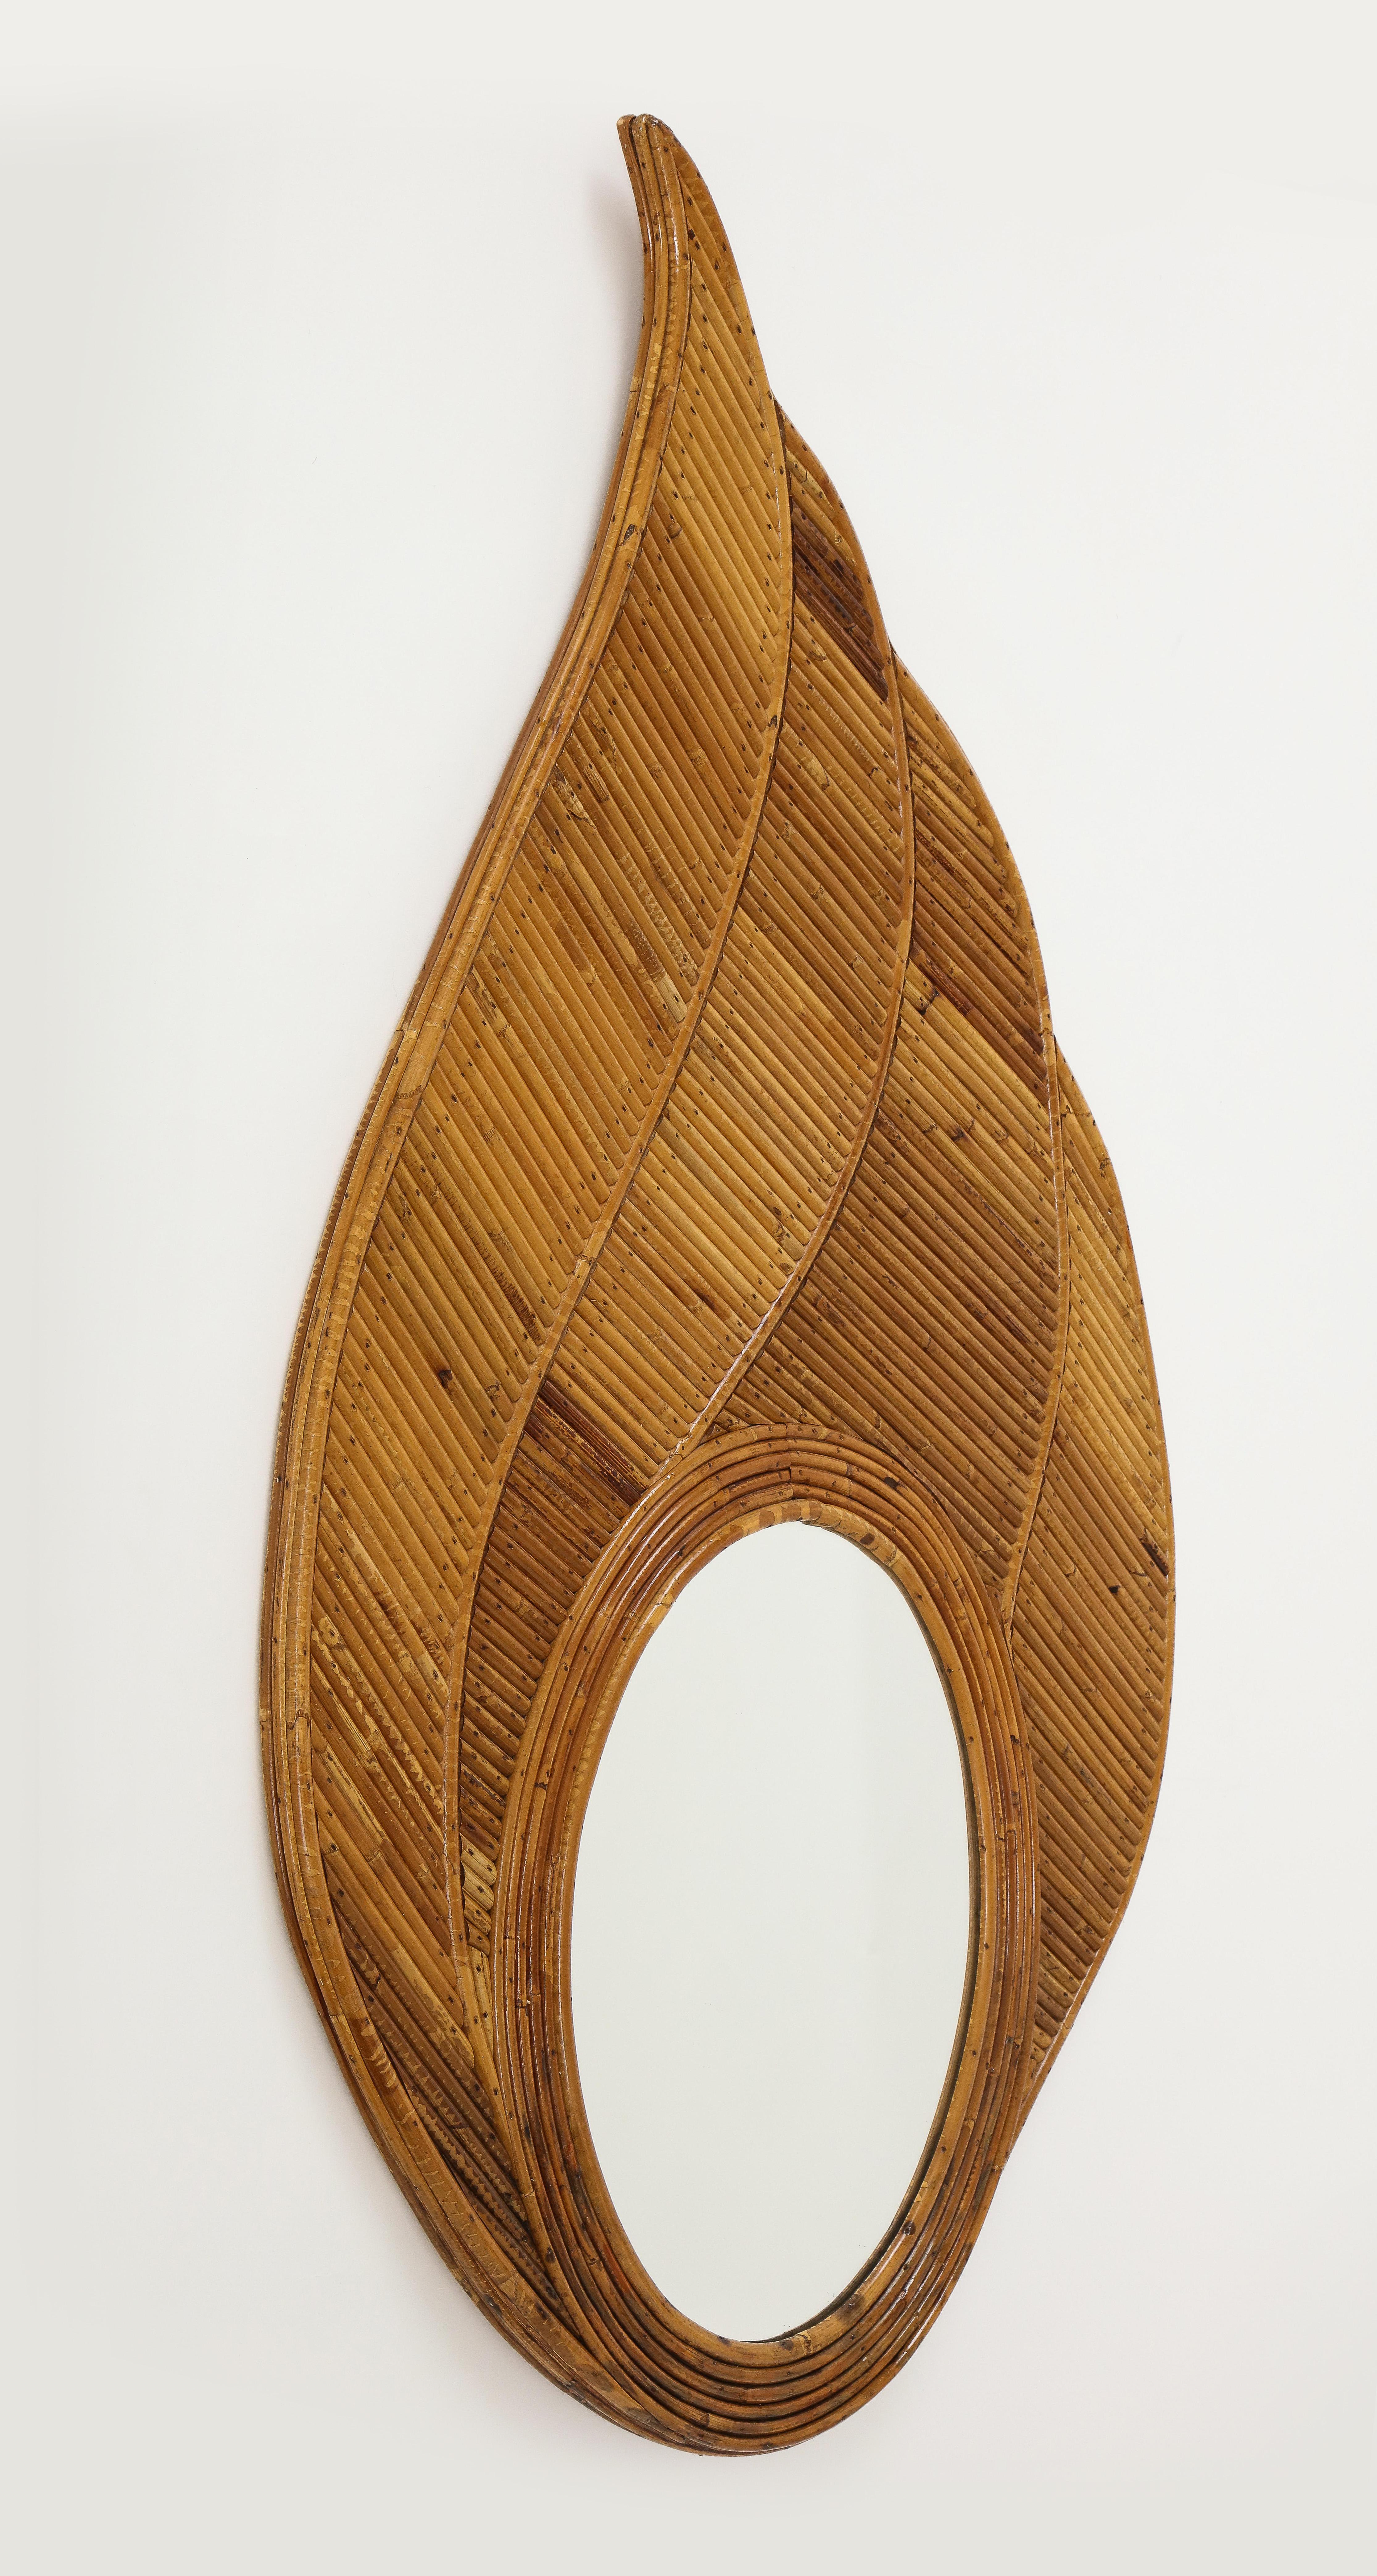 Vivai del Sud rare chic and organic bamboo mirror consisting of strips of pencil reed bamboo expertly handcrafted to create elegant leaf-shaped design. Fully restored with new lacquer finish.

Vivai del Sud was a Roman company established in 1950 as